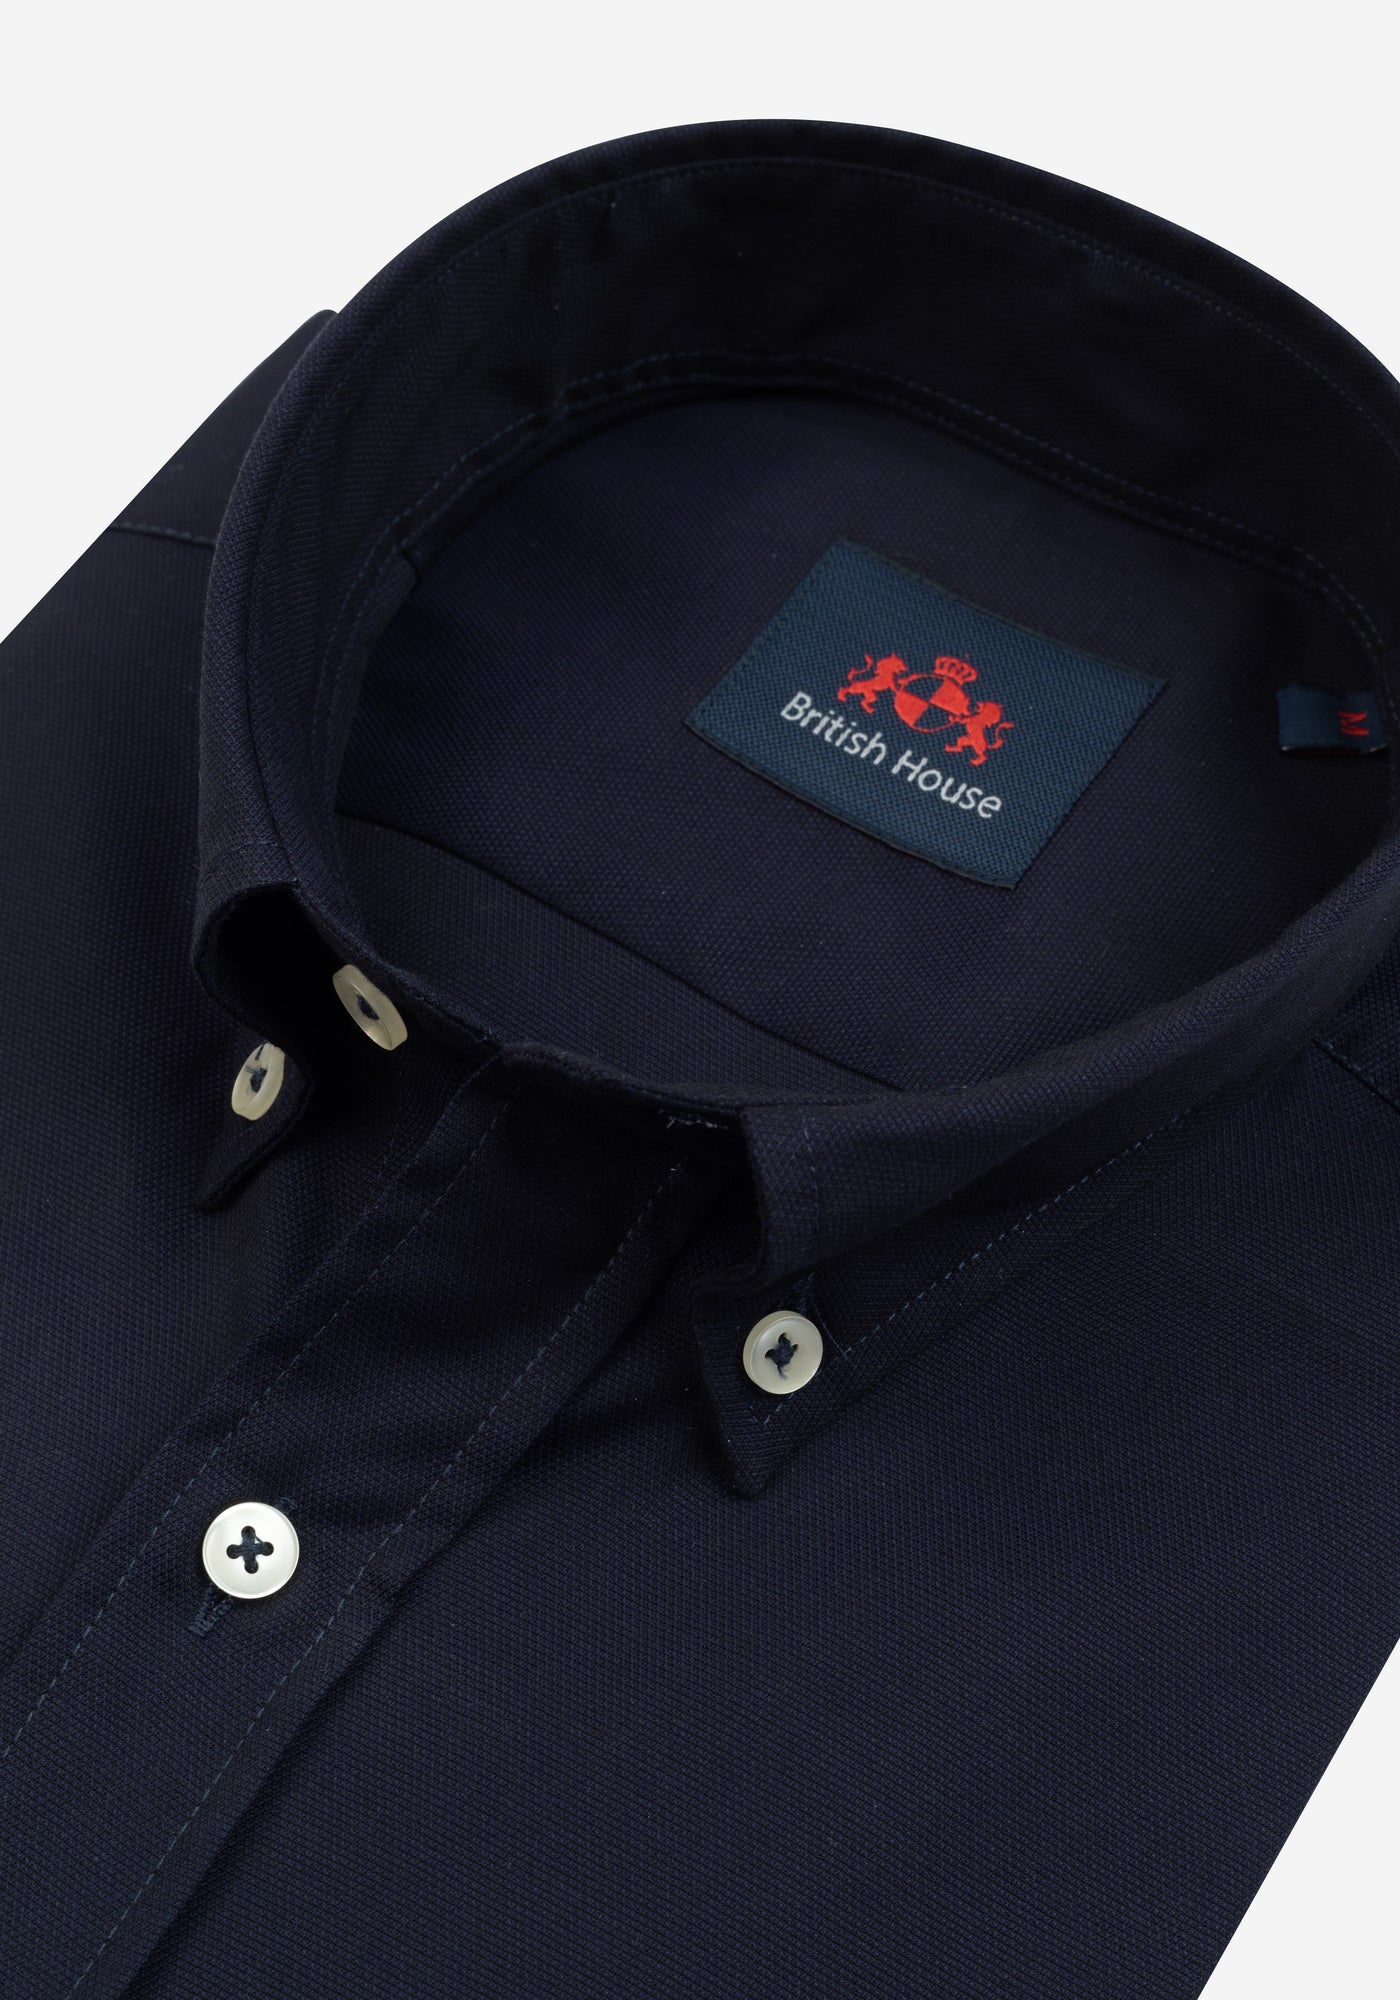 Obsidian Navy Washed Oxford Shirt